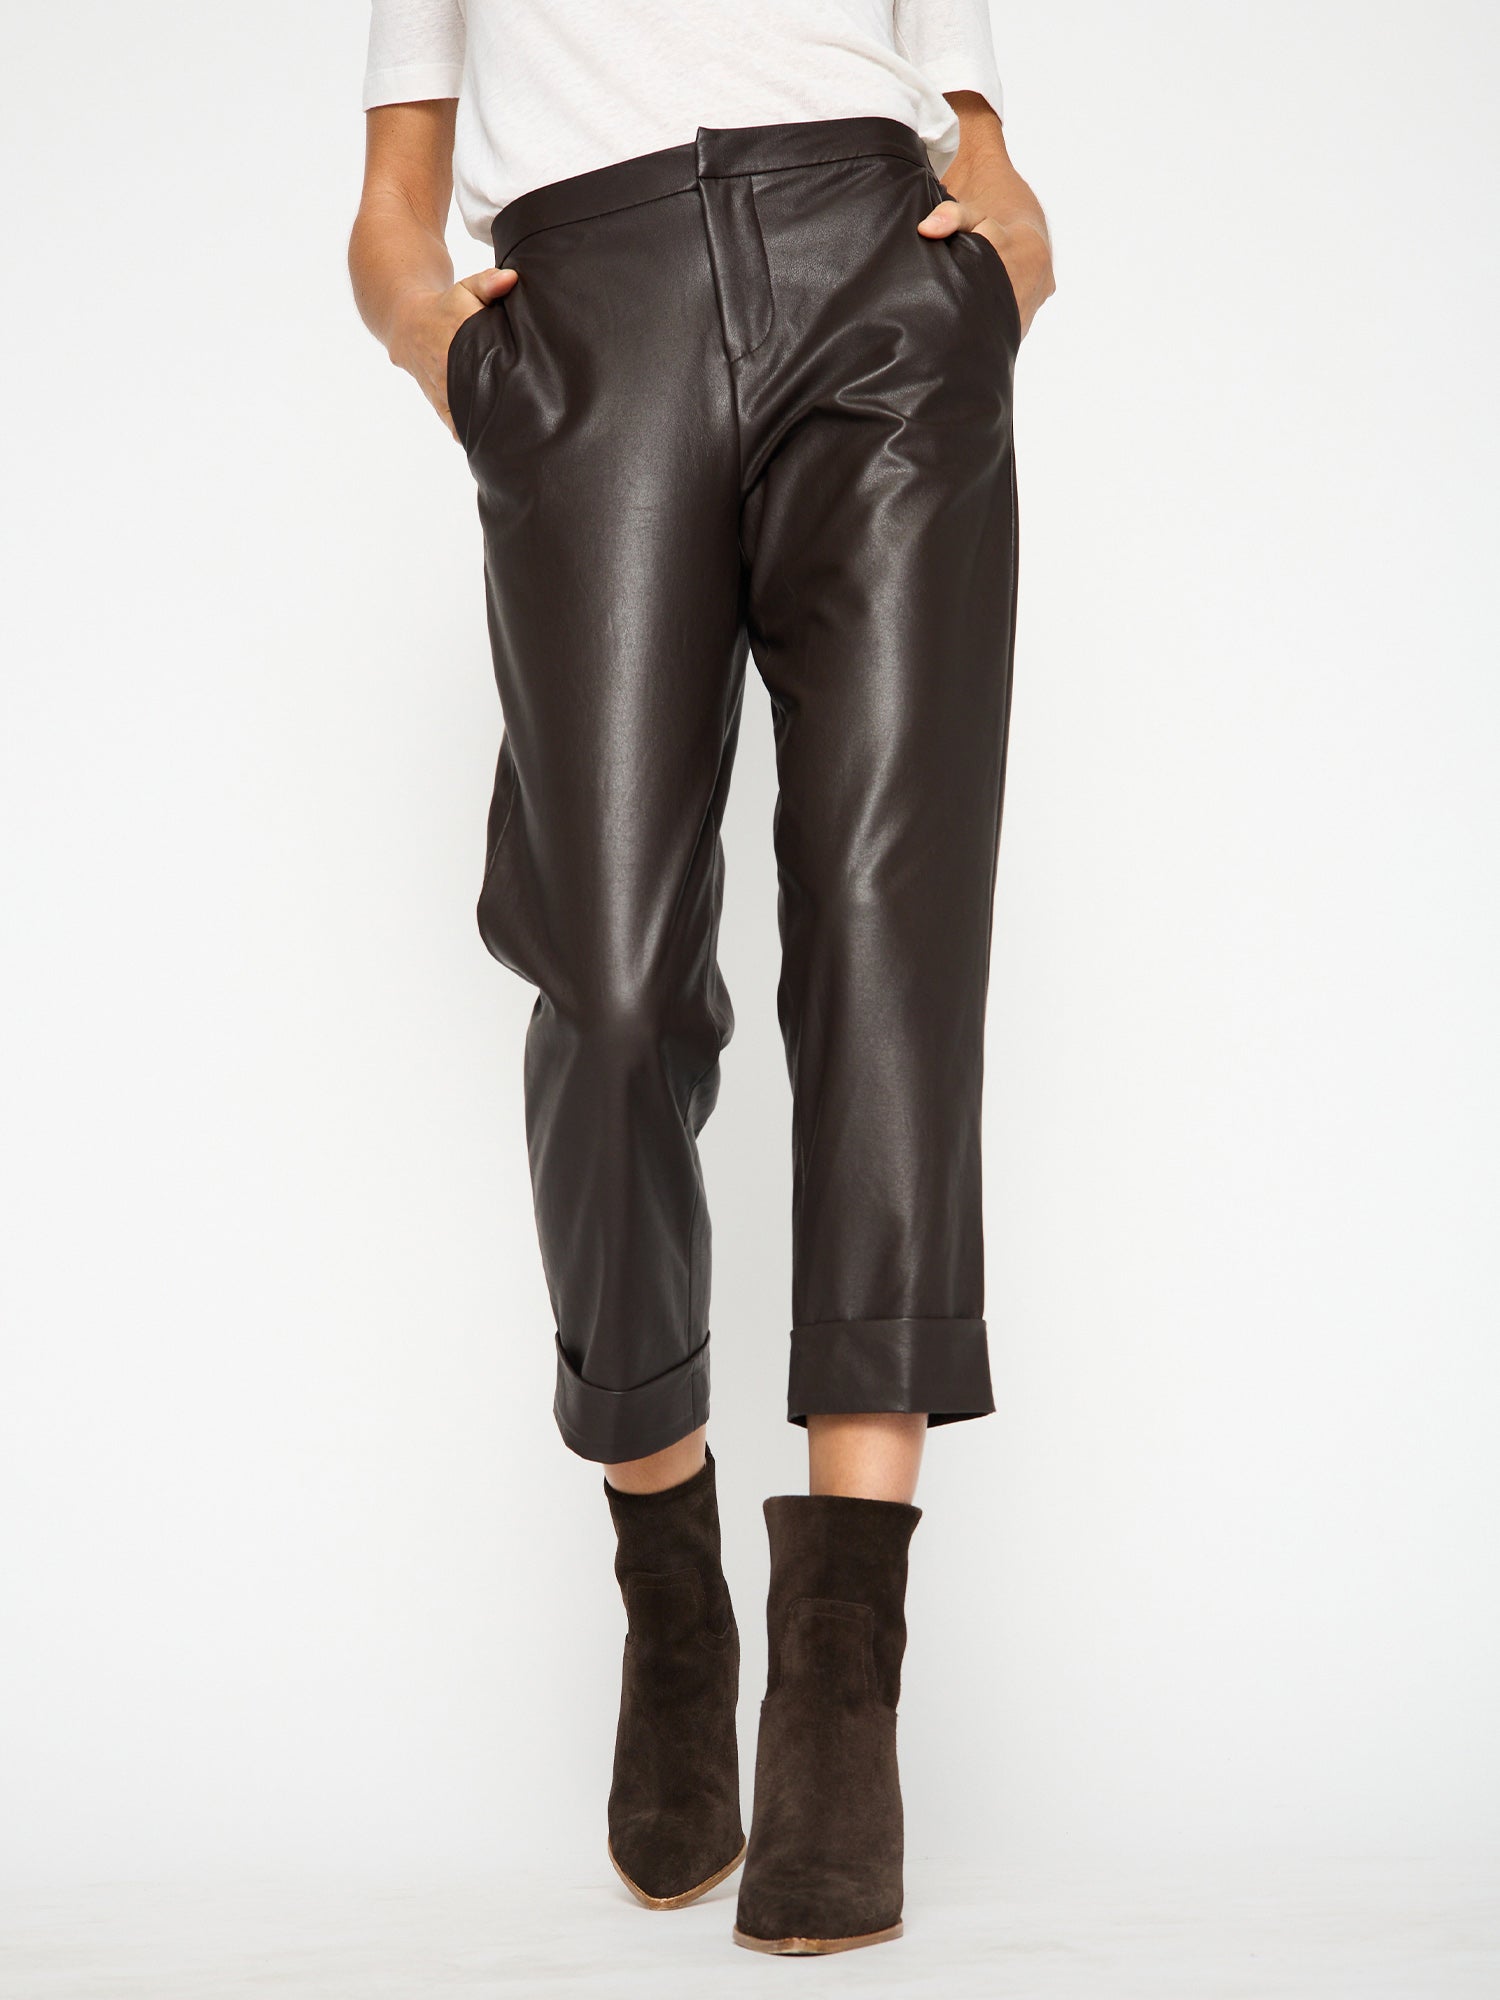 Westport brown vegan leather cropped pant front view